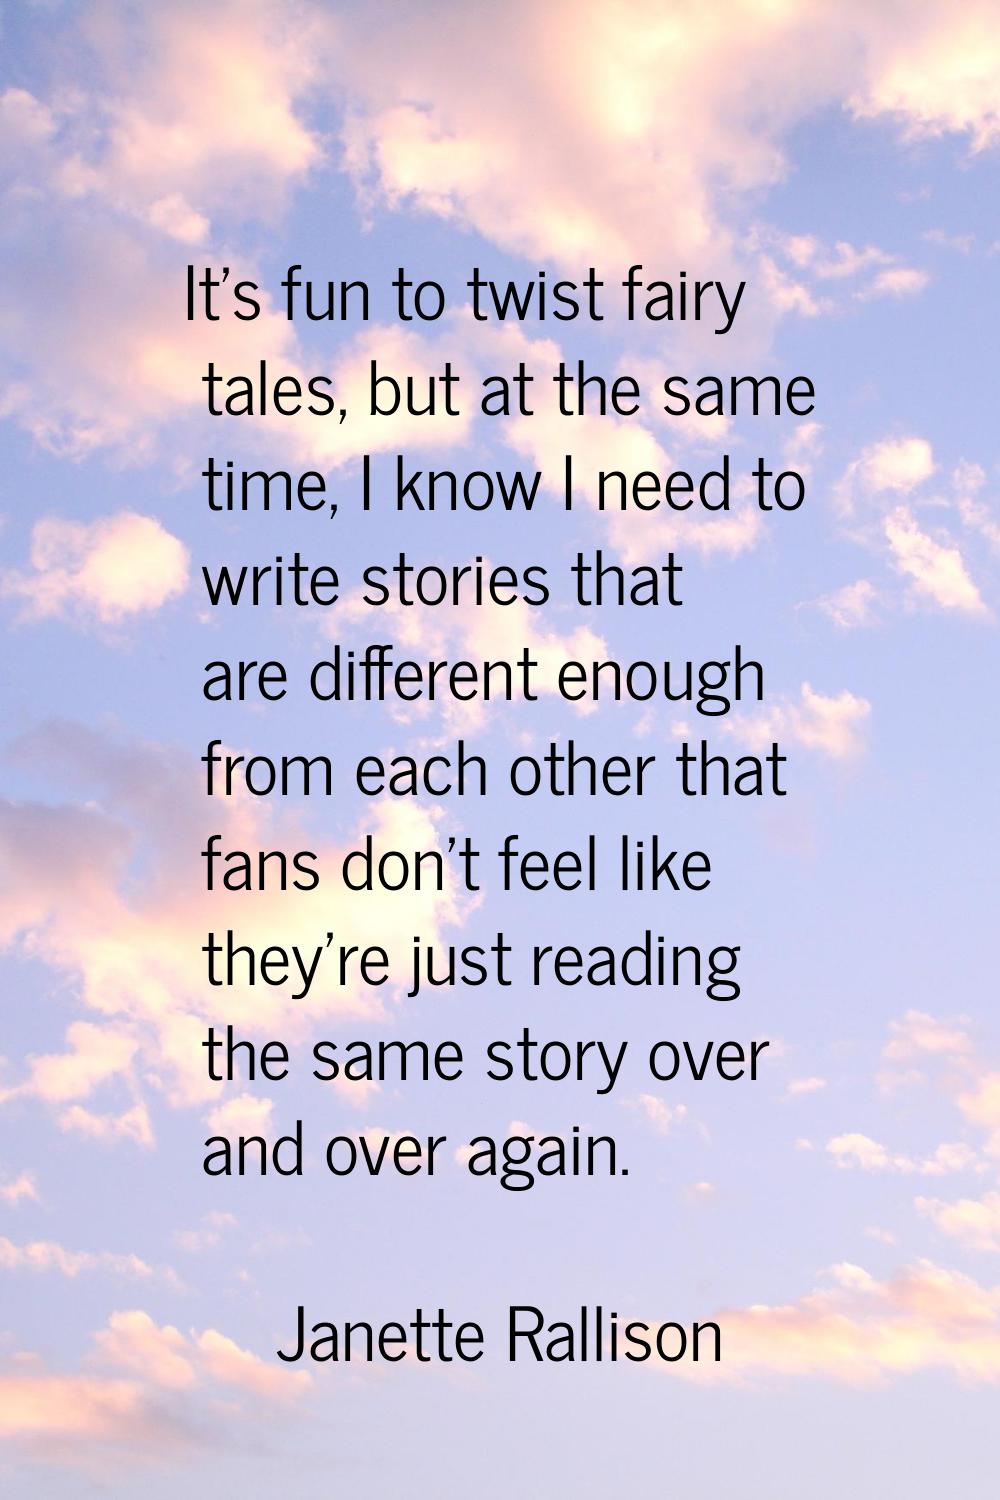 It's fun to twist fairy tales, but at the same time, I know I need to write stories that are differ